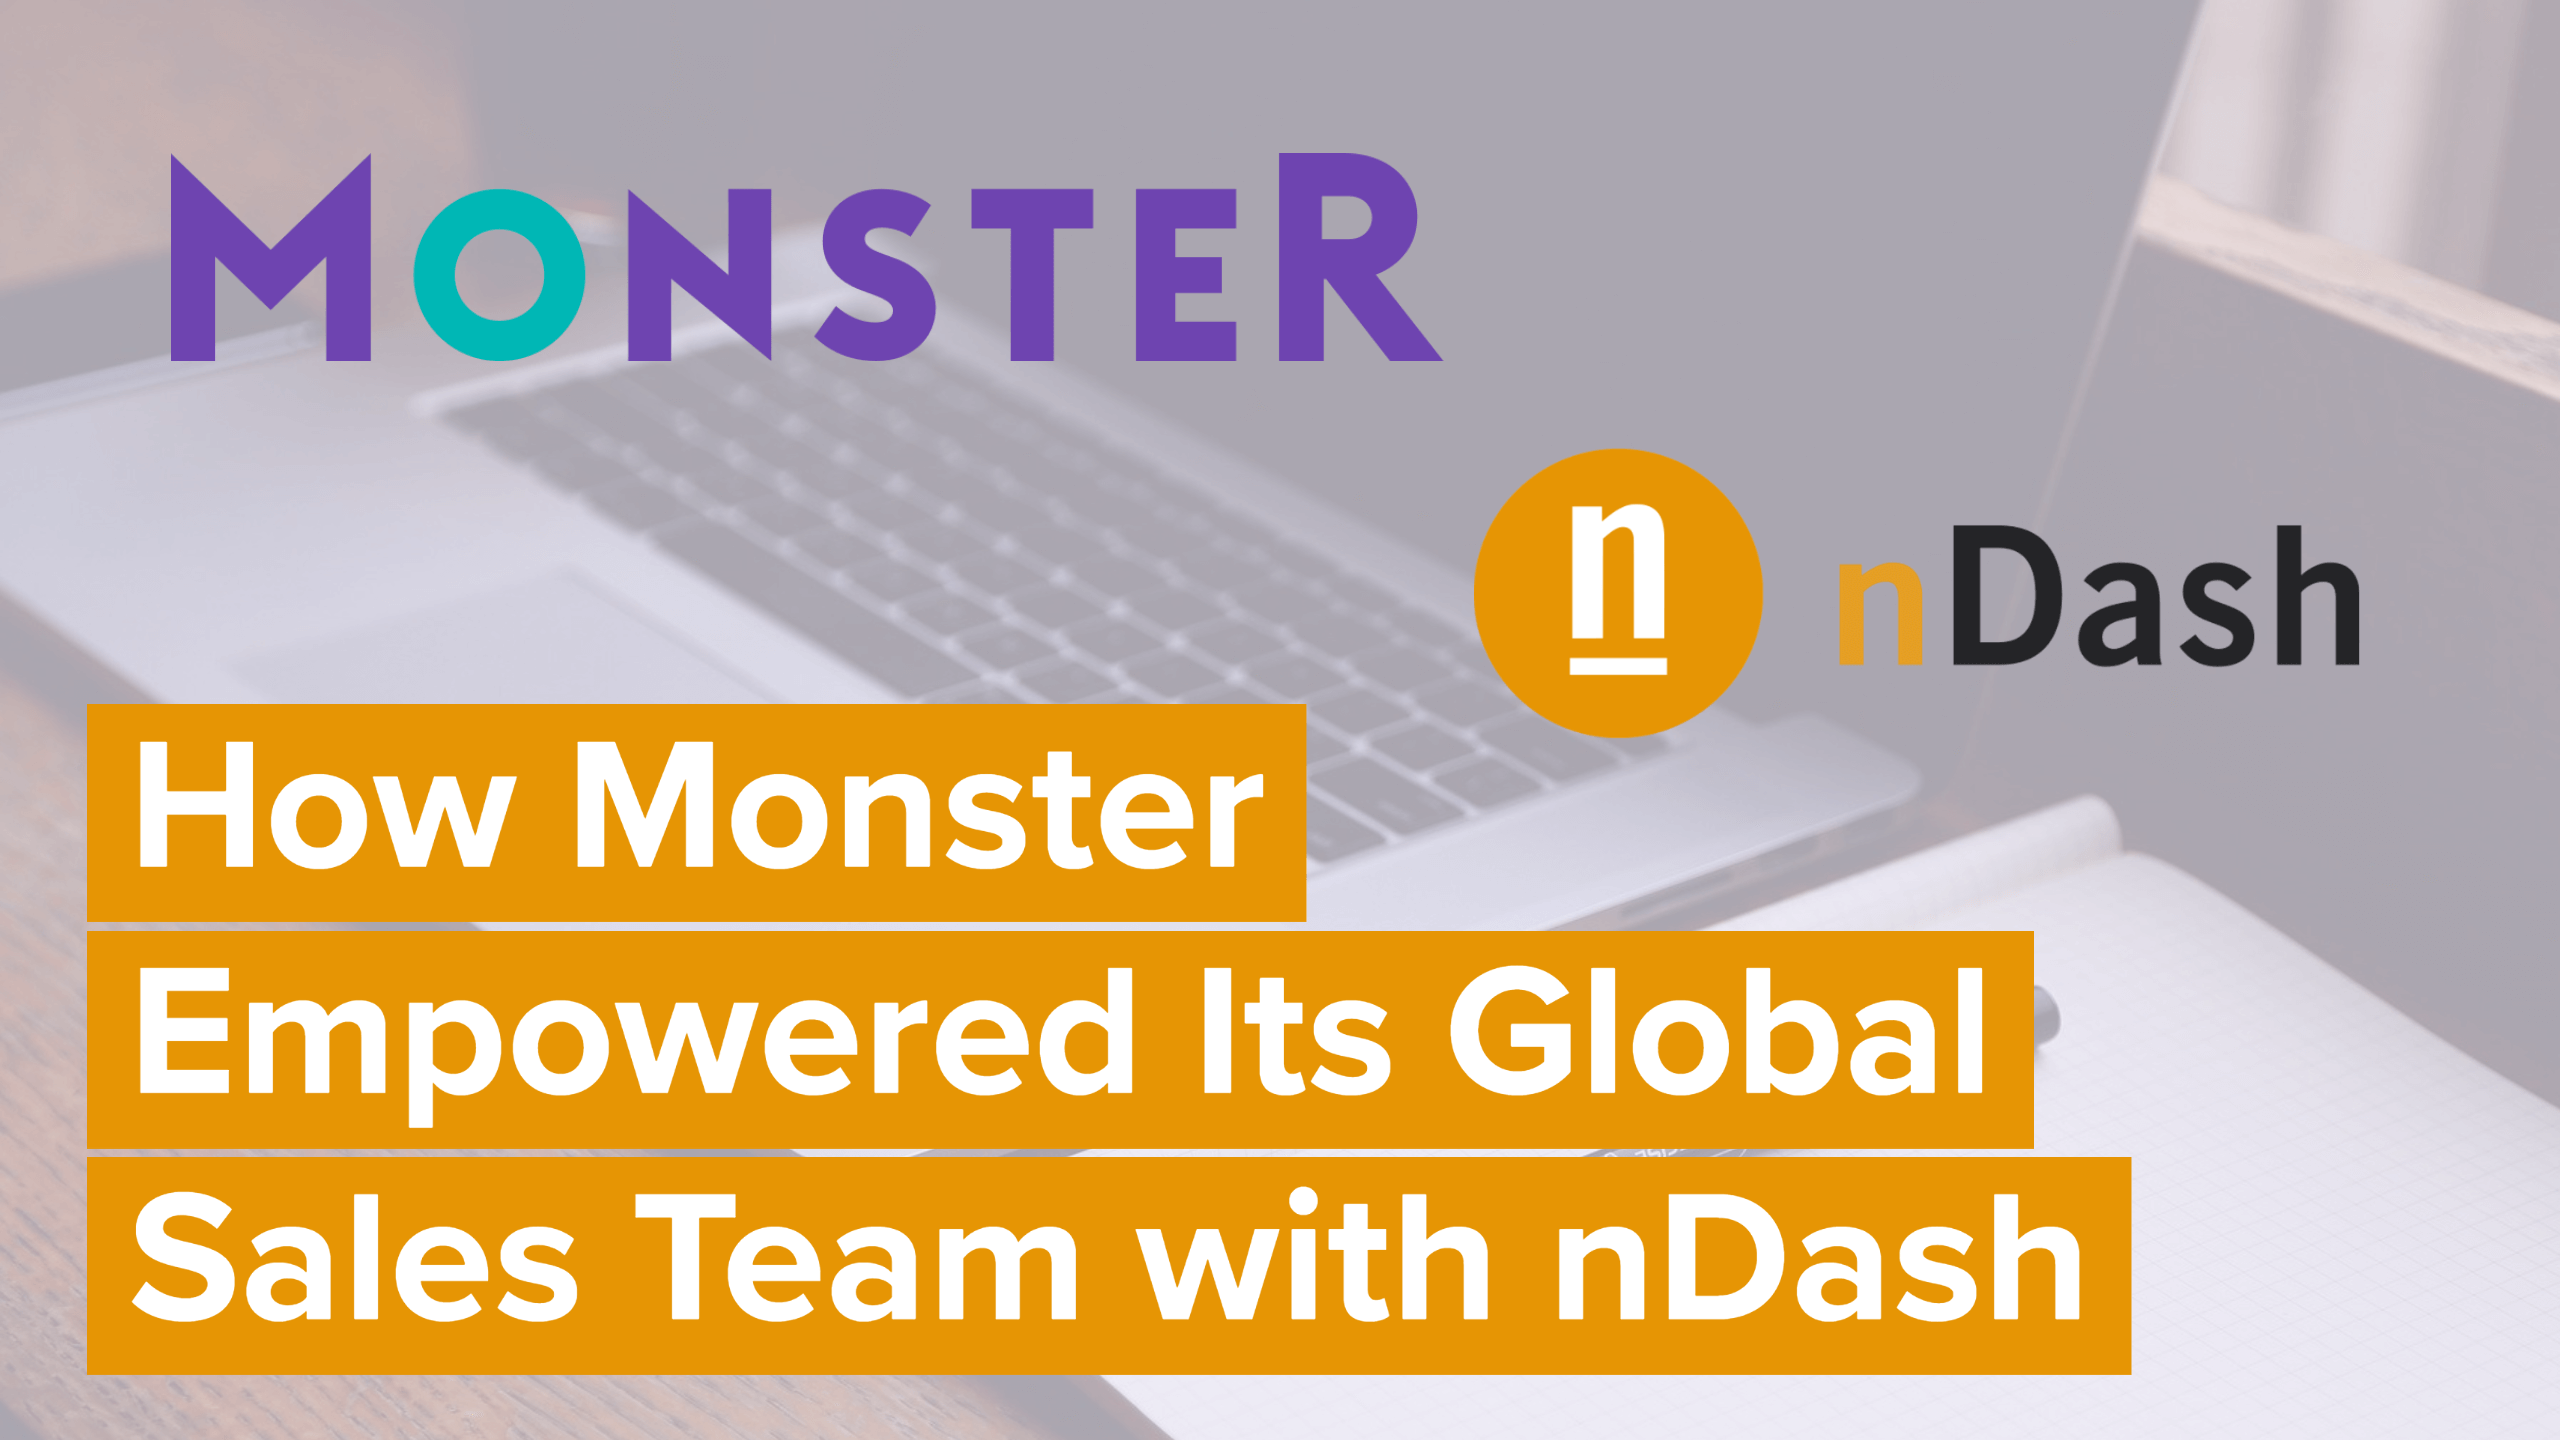 How Monster Empowered Its Global Sales Team with nDash